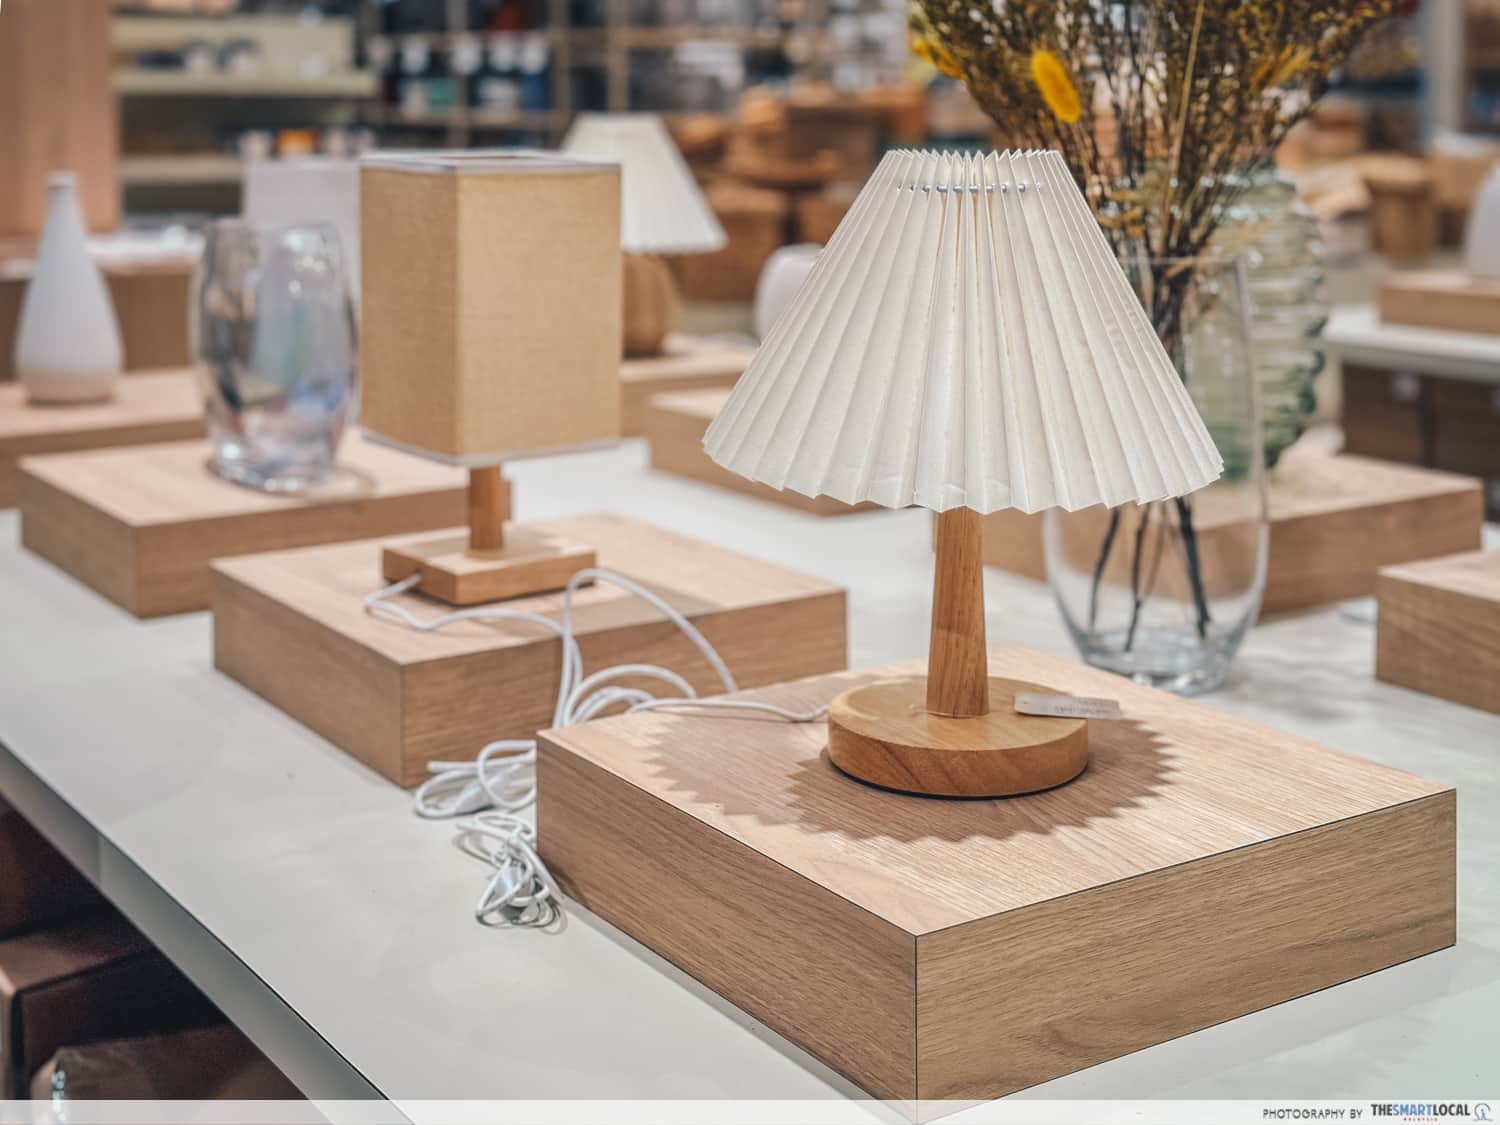 Aesthetic USB table lamps